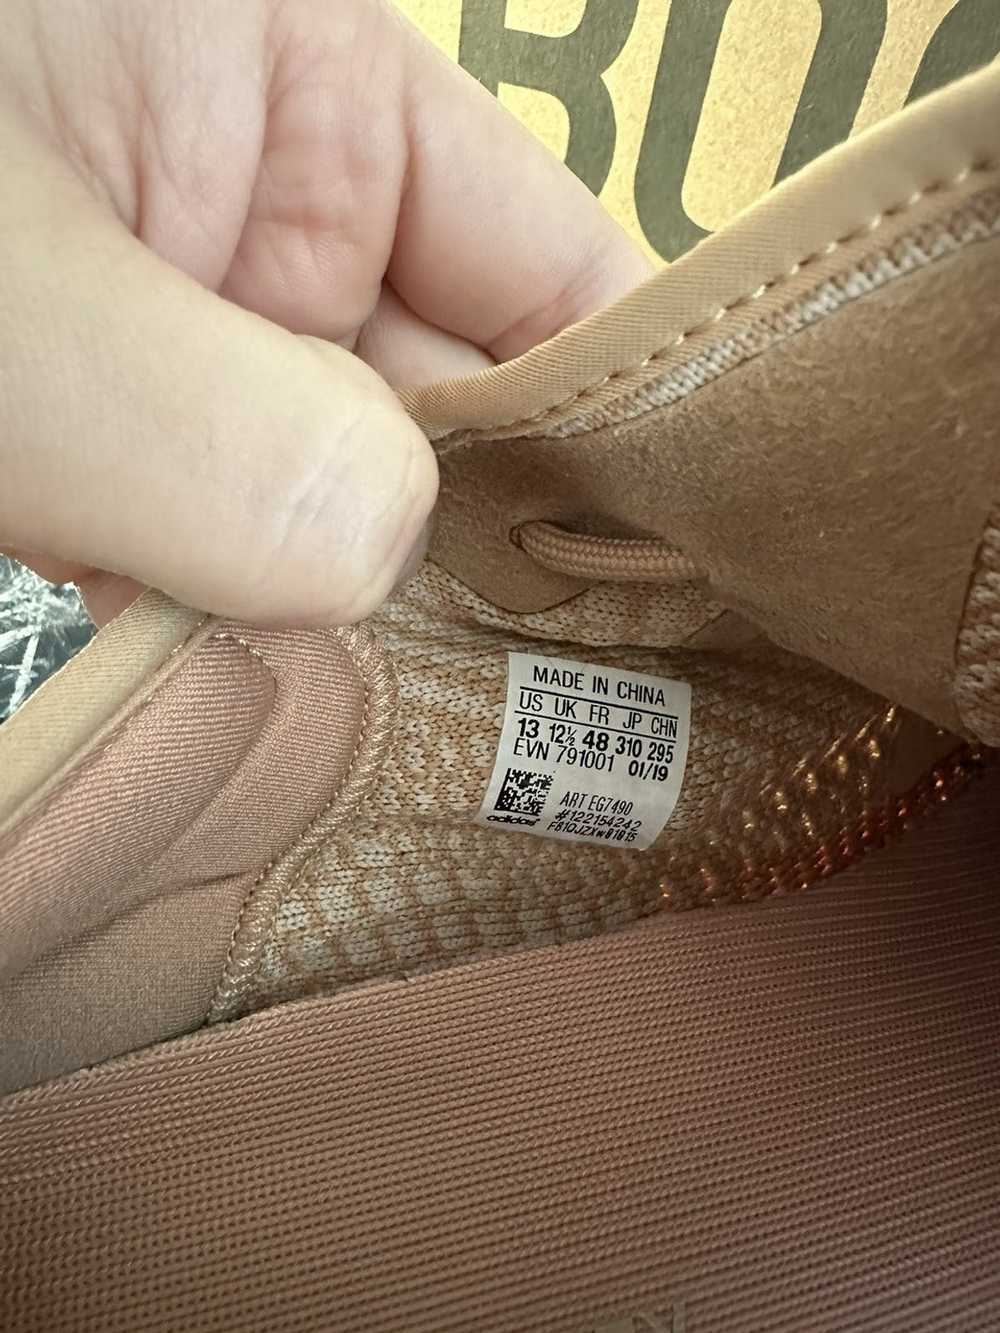 Adidas Yeezy boost 350 clay size 13 - image 6